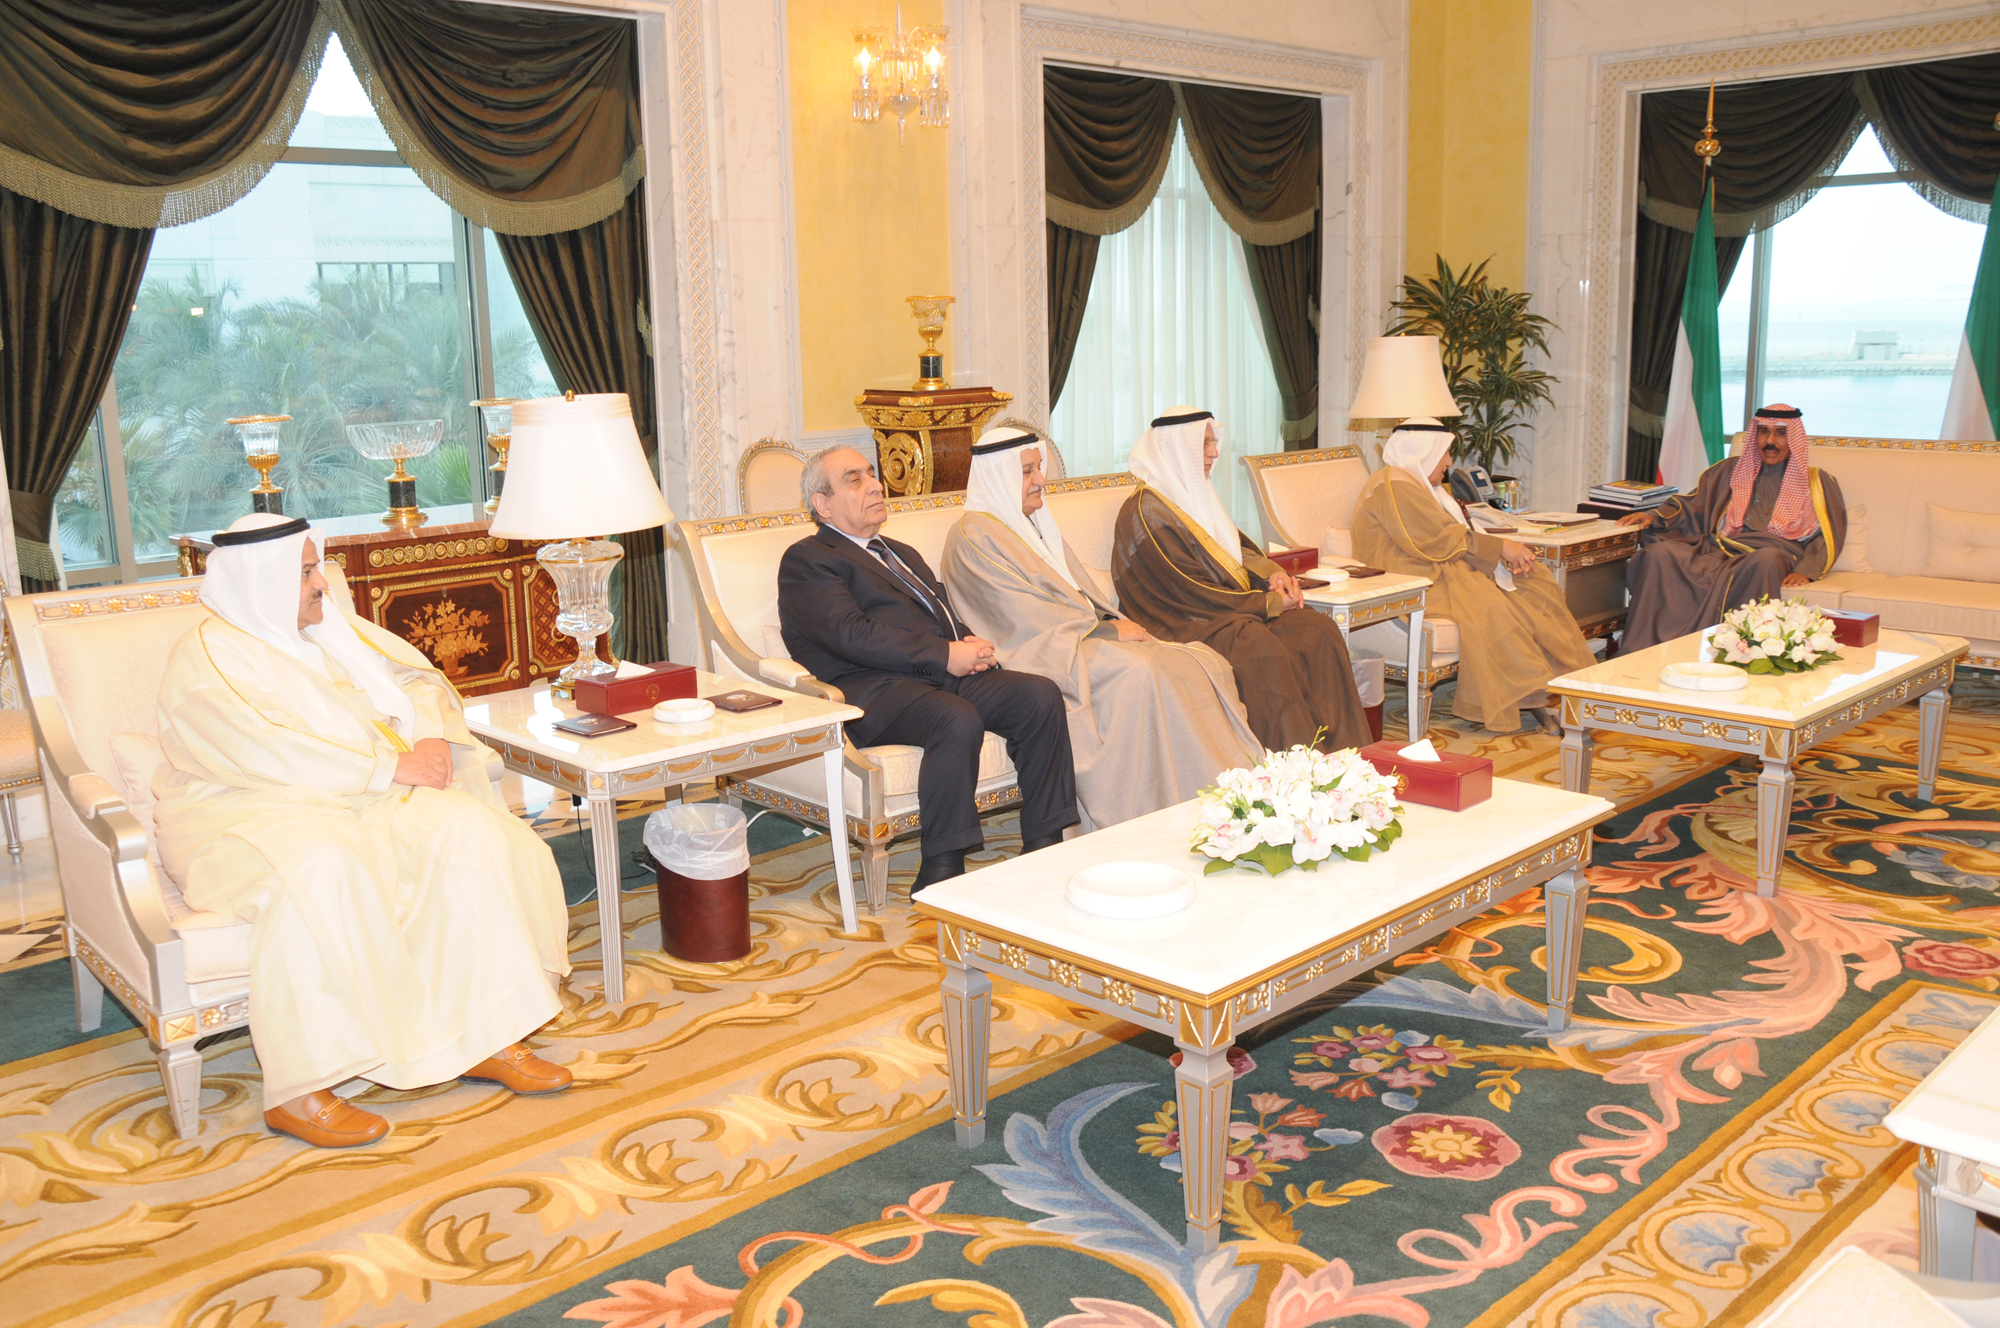 His Highness the Crown Prince Sheikh Nawaf Al-Ahmad Al-Jaber Al-Sabah received Kuwait Chamber of Commerce and Industry (KCCI) Chairman Ali Al-Ghanim and KCCI board members